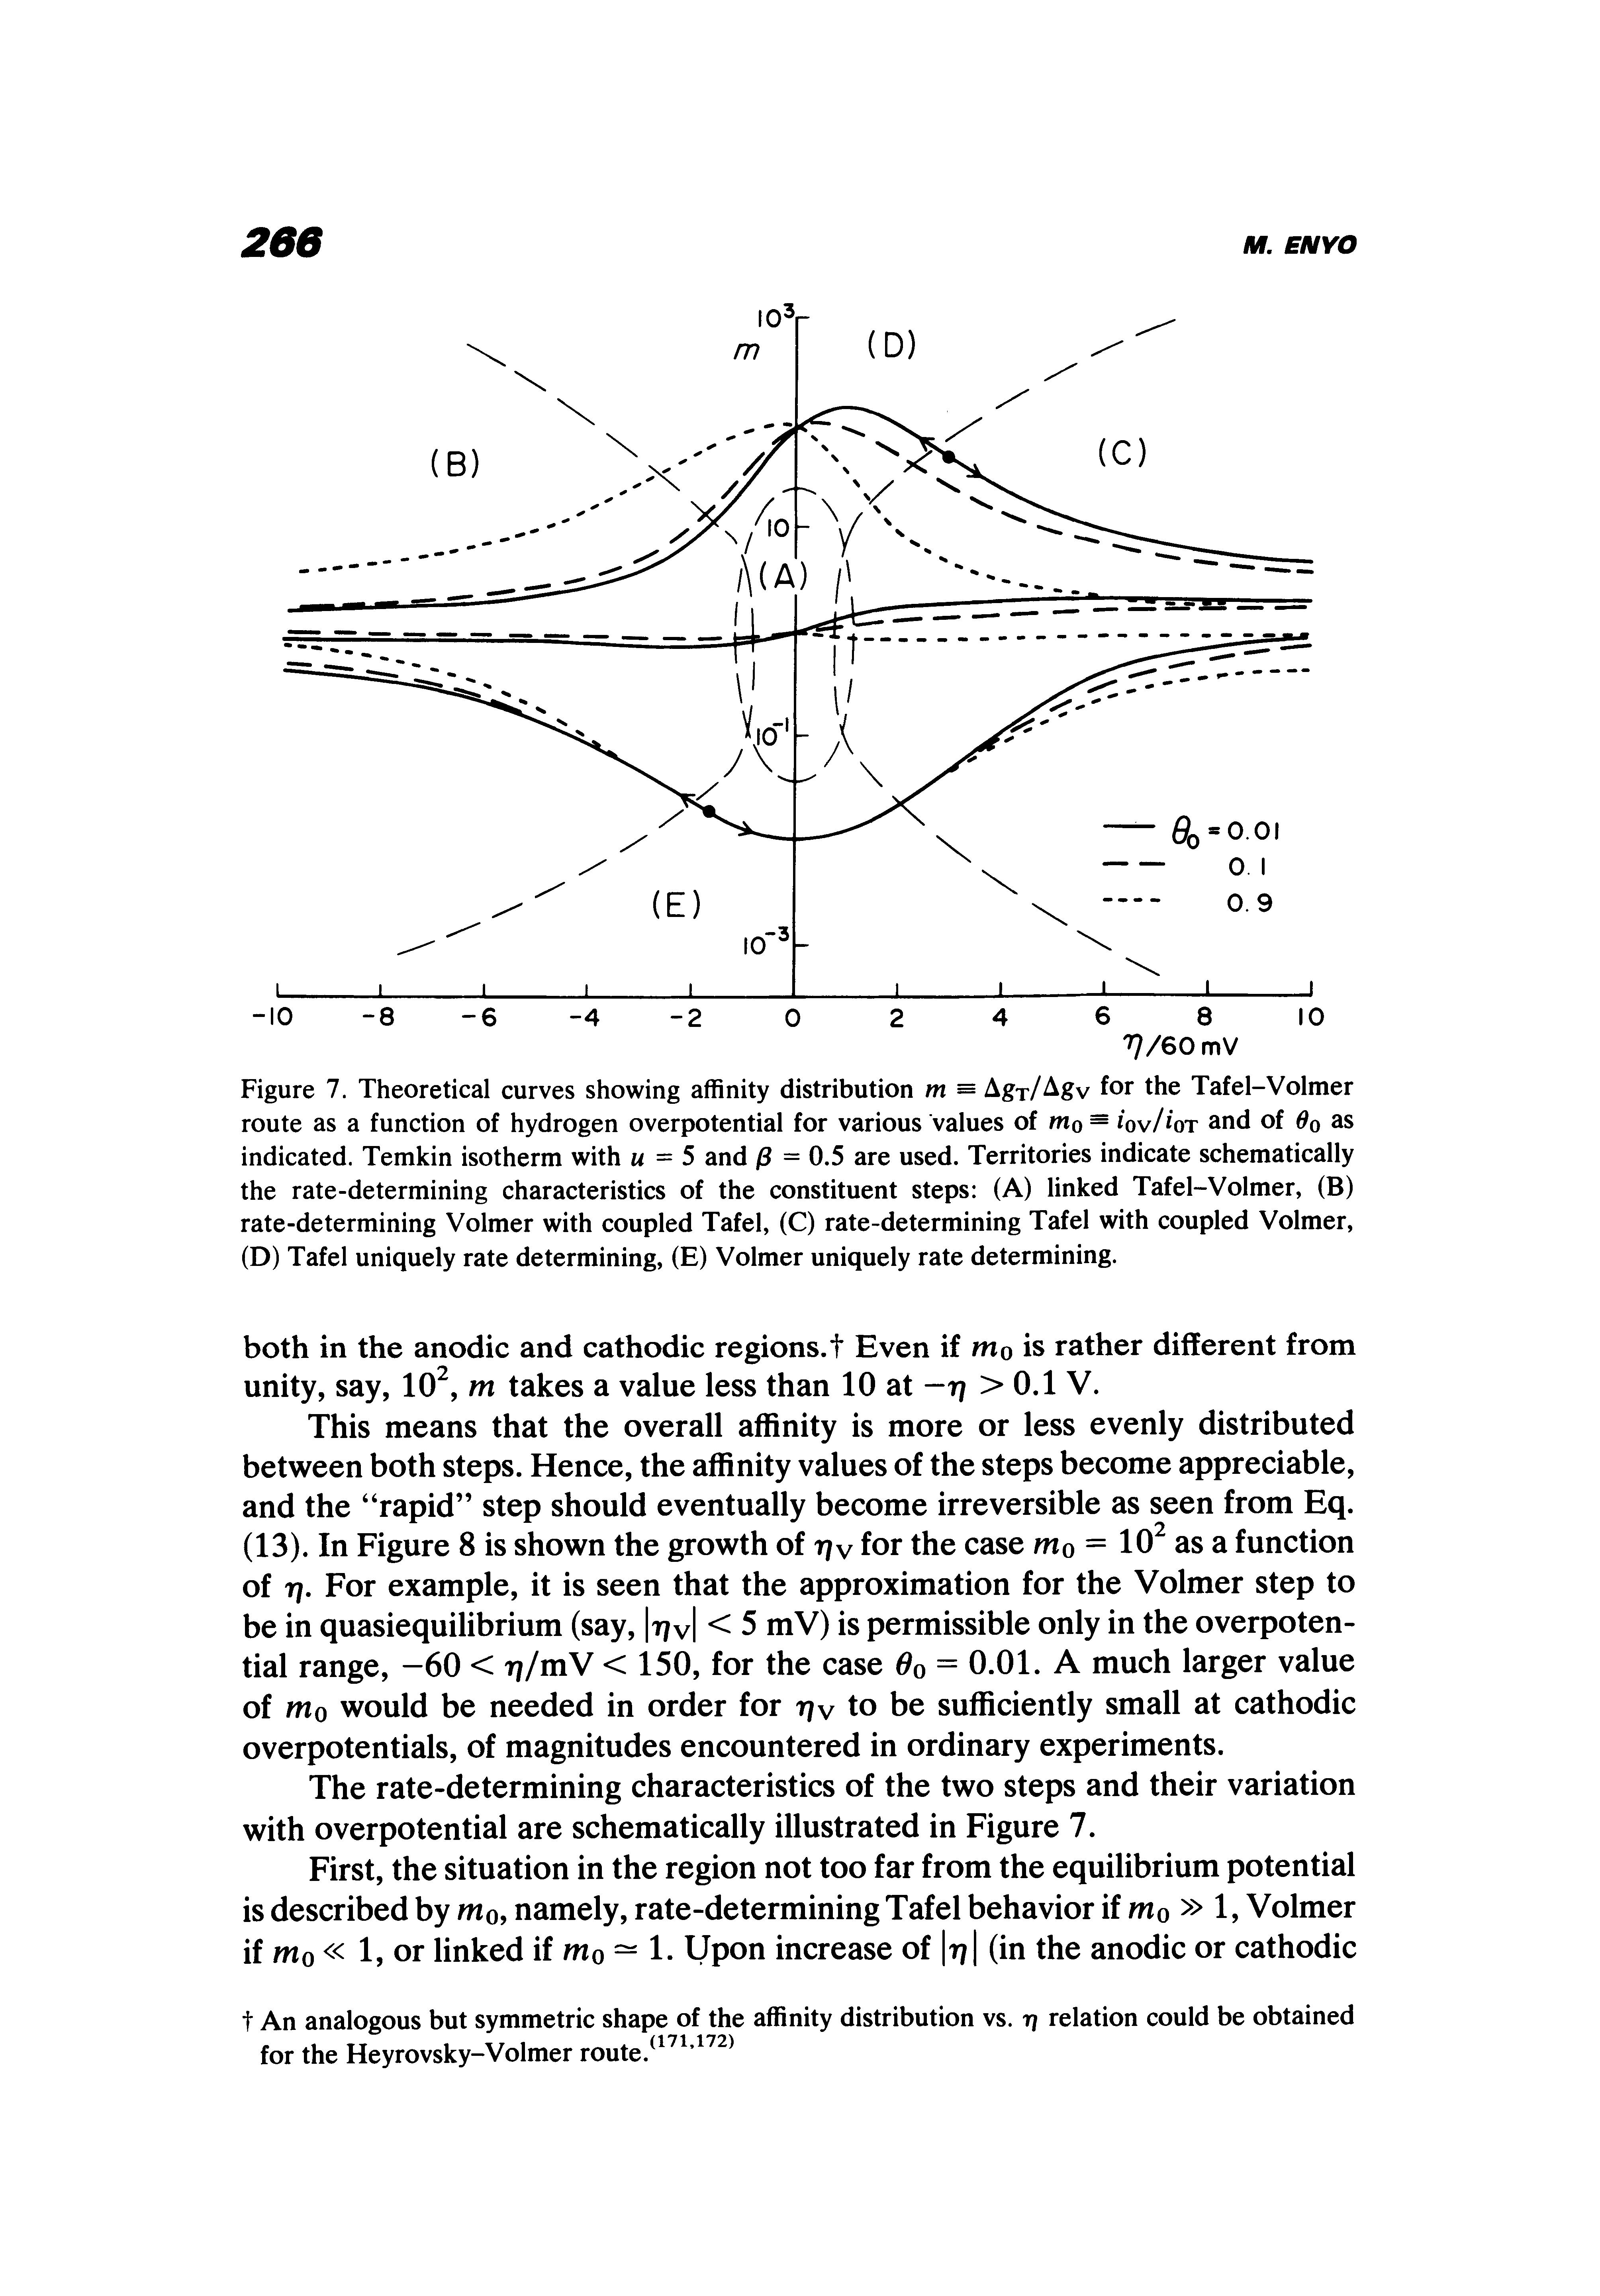 Figure 7. Theoretical curves showing affinity distribution m = Agr/ v for the Tafel-Volmer route as a function of hydrogen overpotential for various values of mo = fov/ ot and of as indicated. Temkin isotherm with u = 5 and j3 = 0.5 are used. Territories indicate schematically the rate-determining characteristics of the constituent steps (A) linked Tafel-Volmer, (B) rate-determining Volmer with coupled Tafel, (C) rate-determining Tafel with coupled Volmer, (D) Tafel uniquely rate determining, (E) Volmer uniquely rate determining.